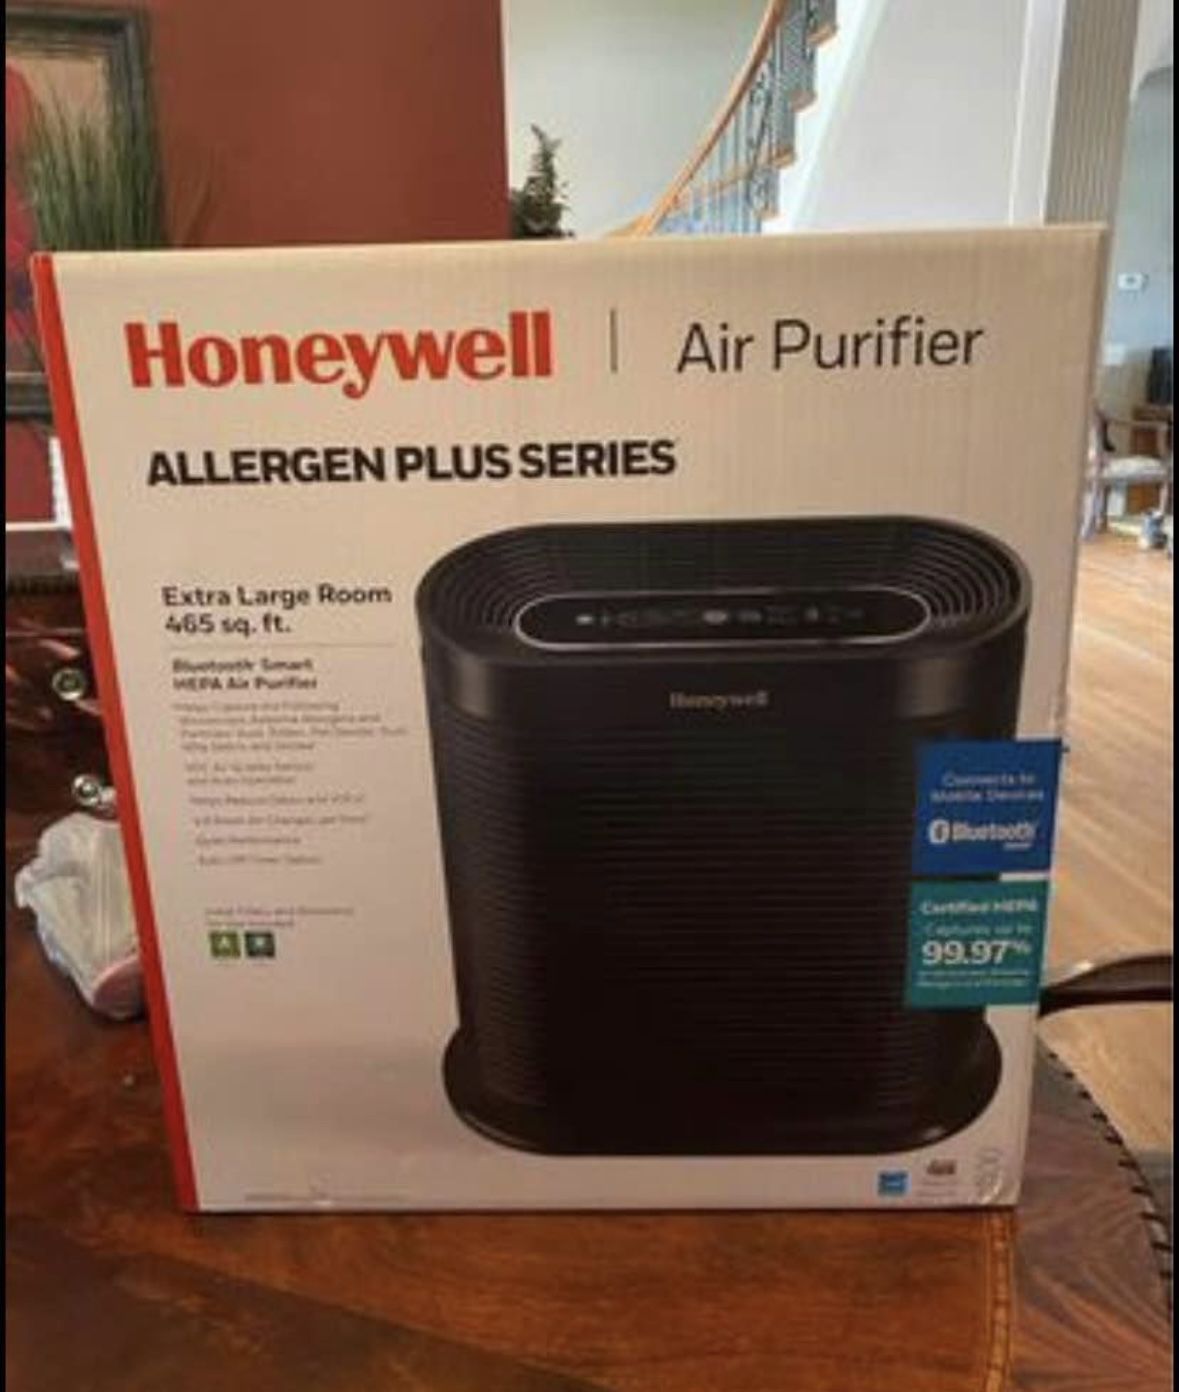 New Honeywell Allergen Plus Air Purifier For Extra Large Rooms Bluetooth Smart (retails $309)